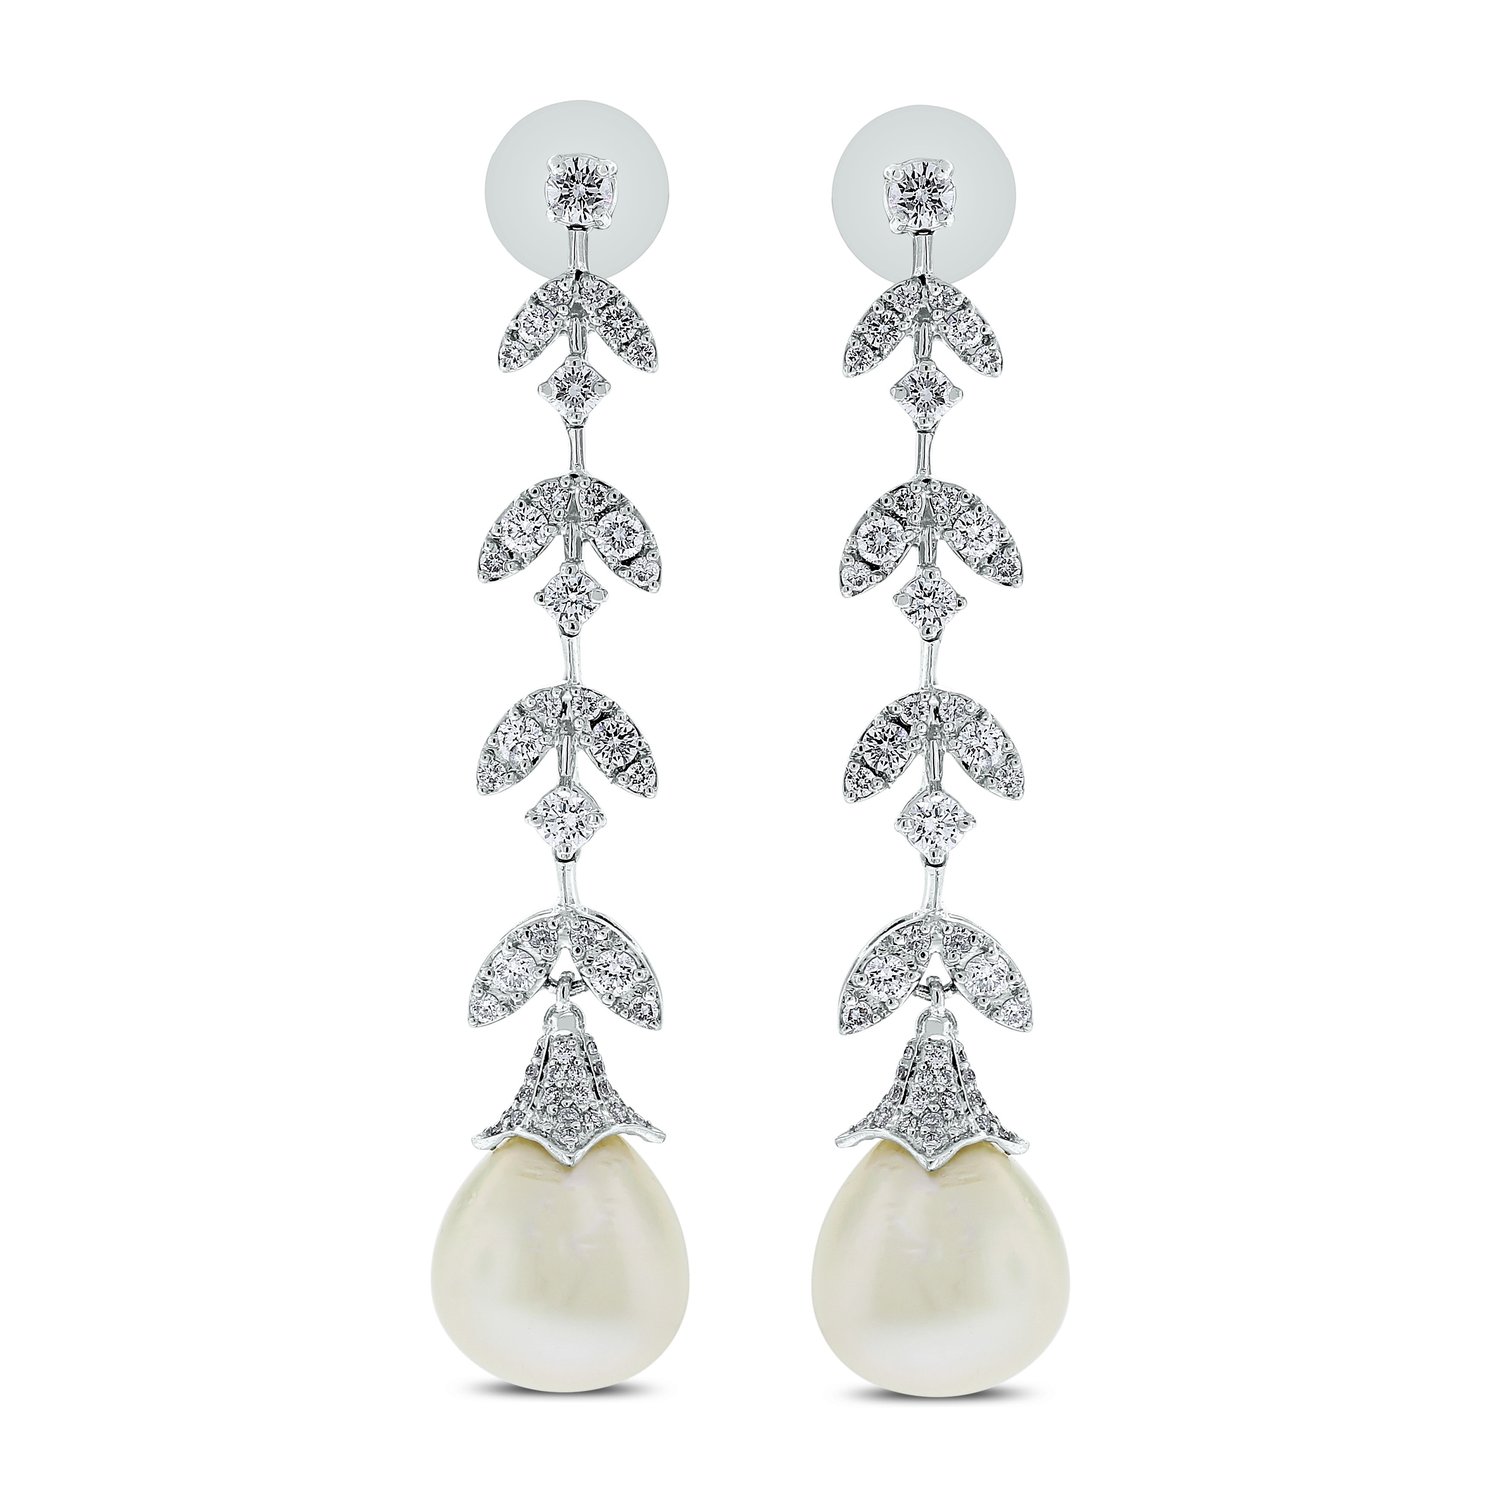 Diamond and Pearl Vines Earrings by Beauvince Jewelry